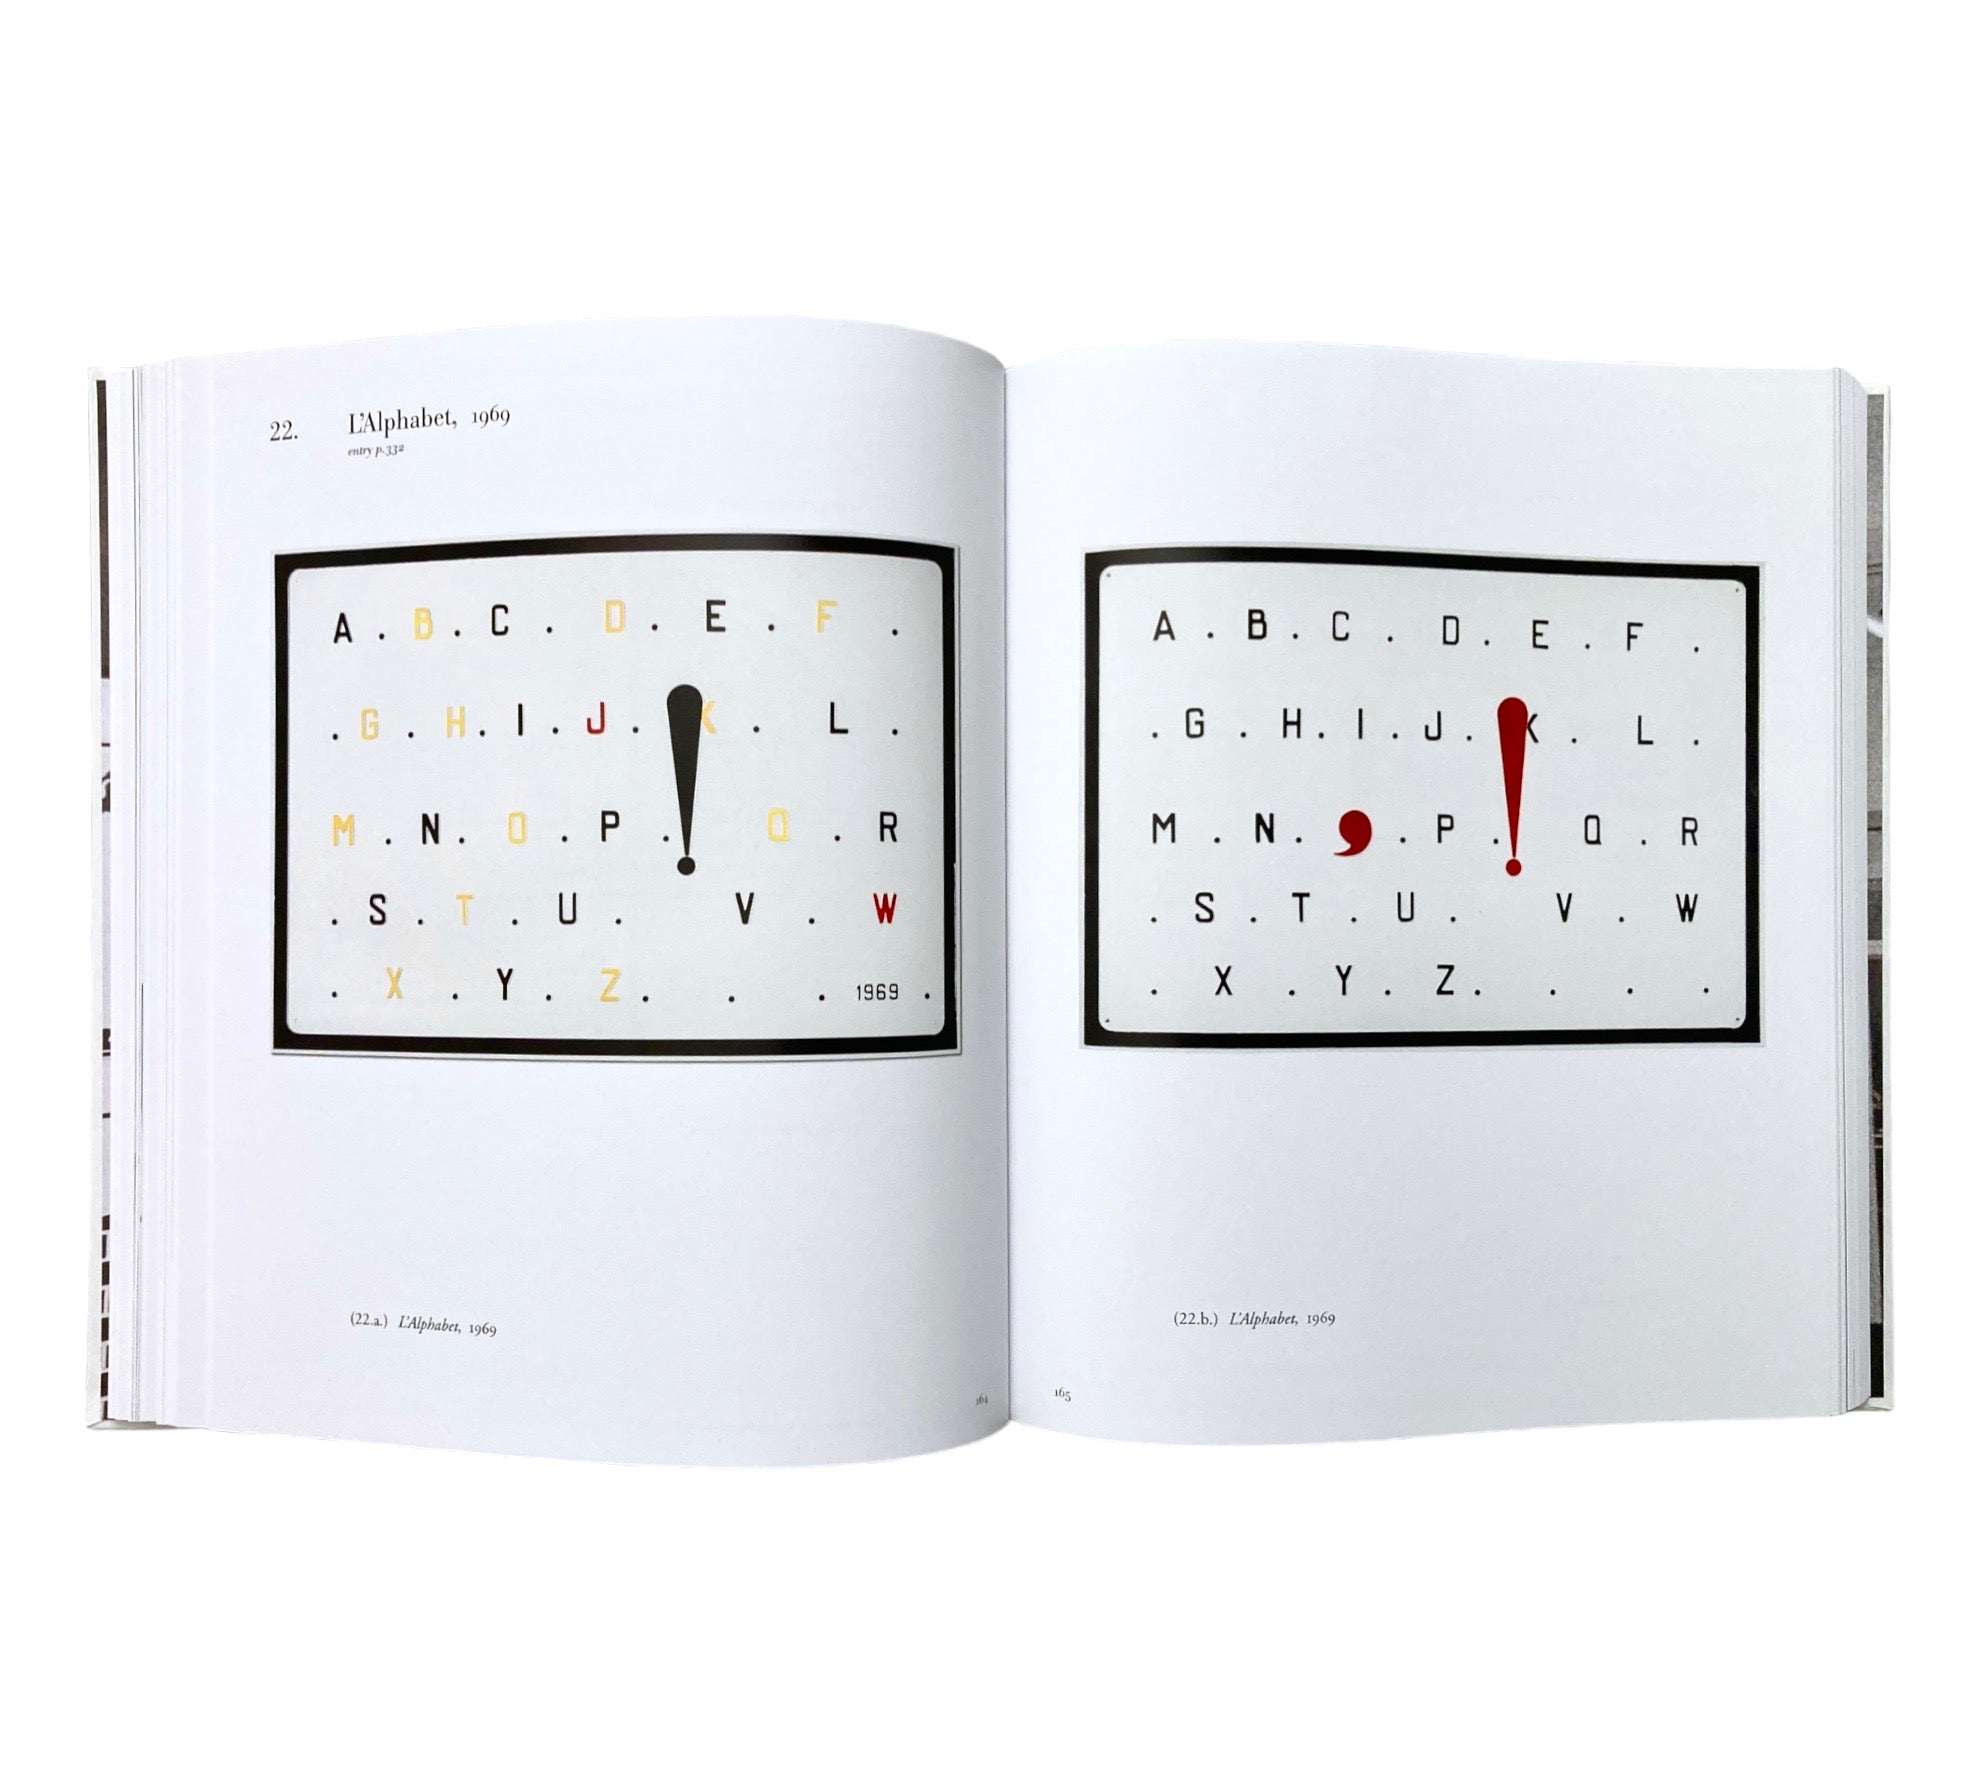 Marcel Broodthaers: Industrial Poems - The Complete Catalogue of the Plaques 1968–1972